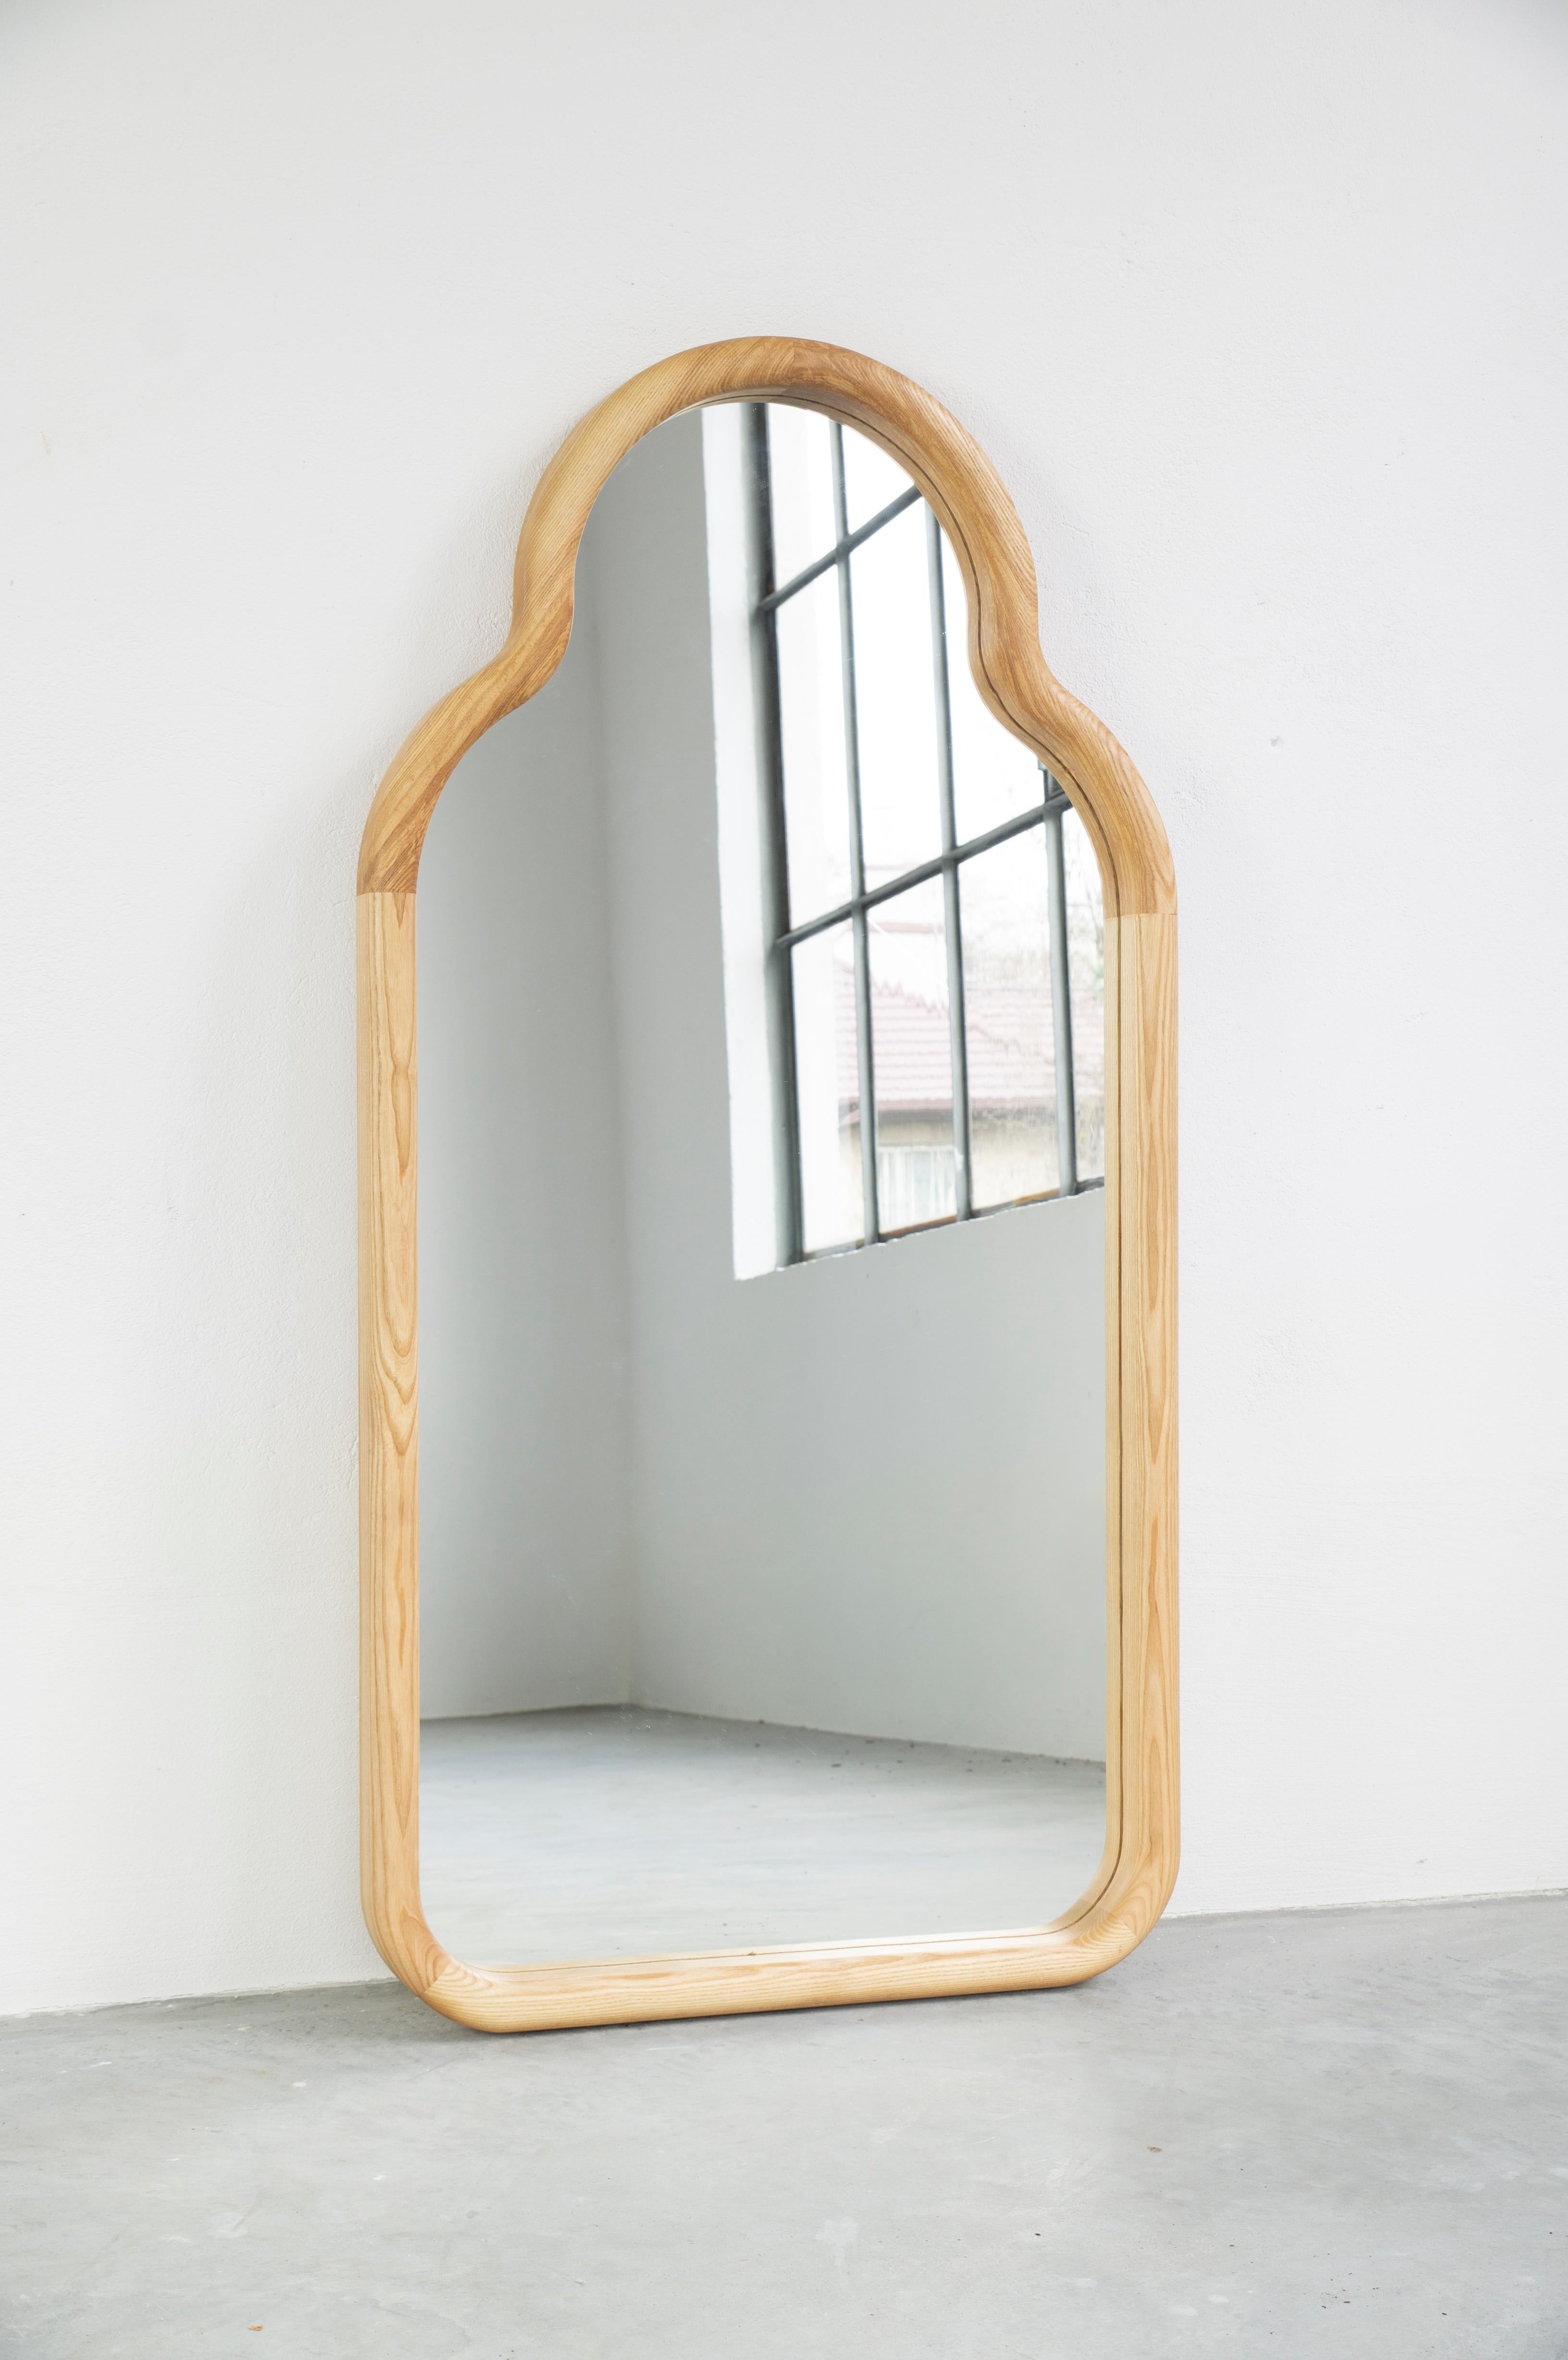 TRN M Floor mirror
Signed by Pani Jurek

Dimensions: H110 x 51,5 x 5
Materials: Solid ash wood, hand stained
Colors: red, blue, green, natural

_________________________________

Pani Jurek is a Polish design studio founded by artist and designer